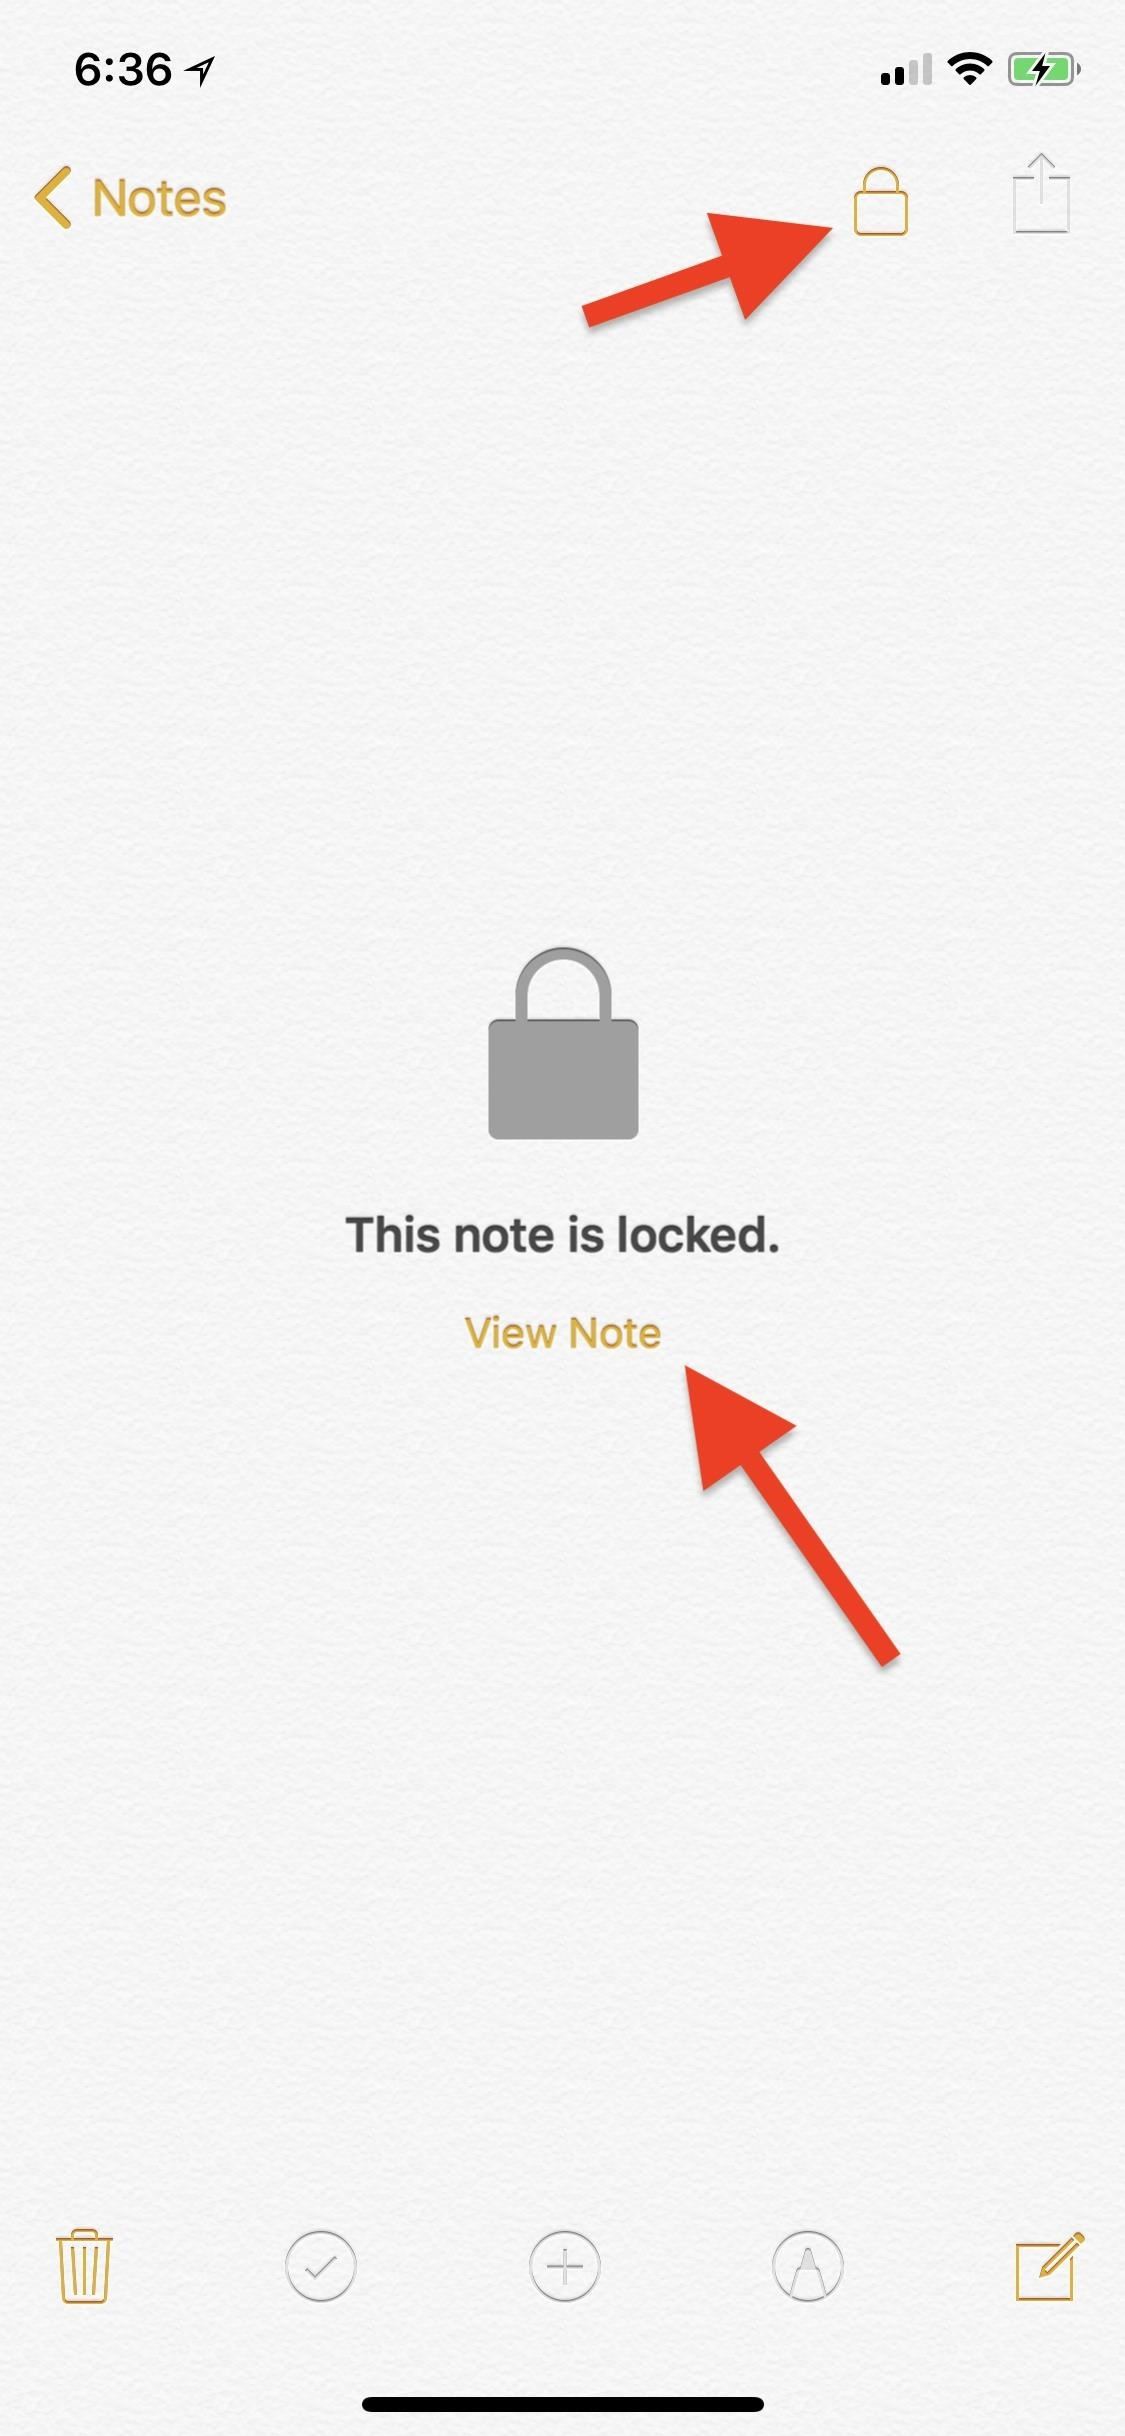 Notes 101: How to Lock Notes with Face ID or Touch ID (& Password Protection)